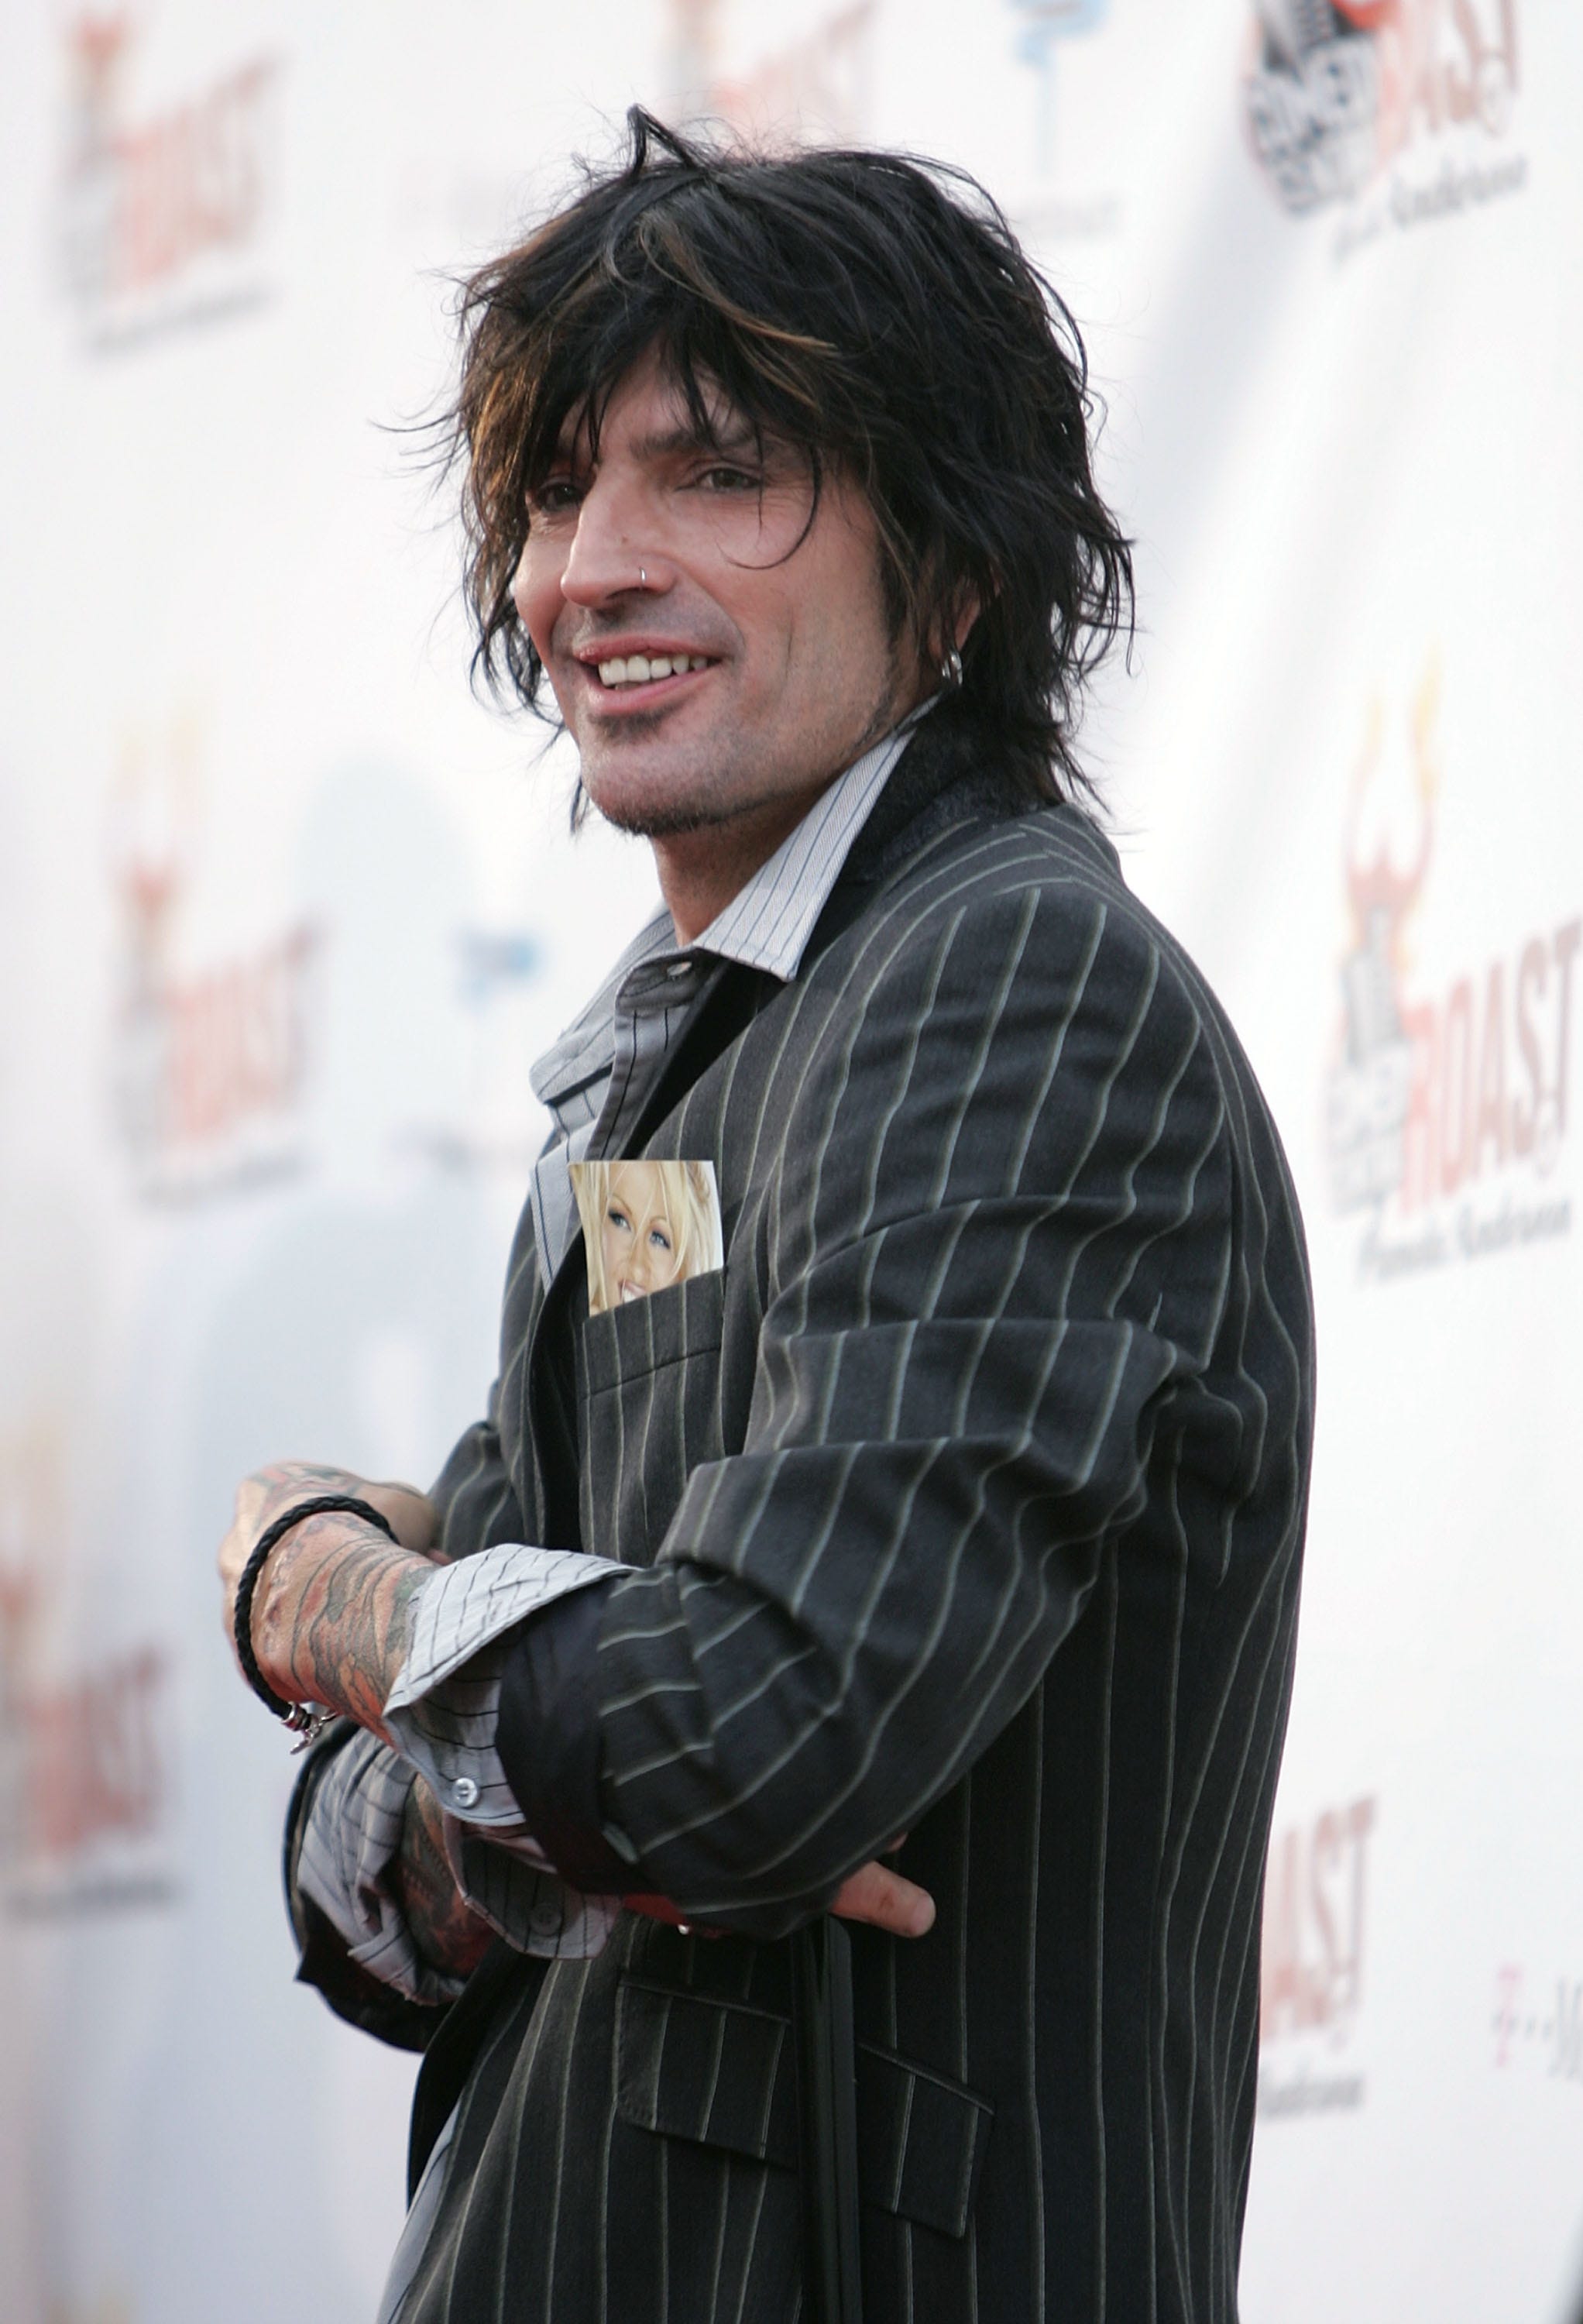 Tommy Lee says he was 'on a bender' when he posted nude photo online